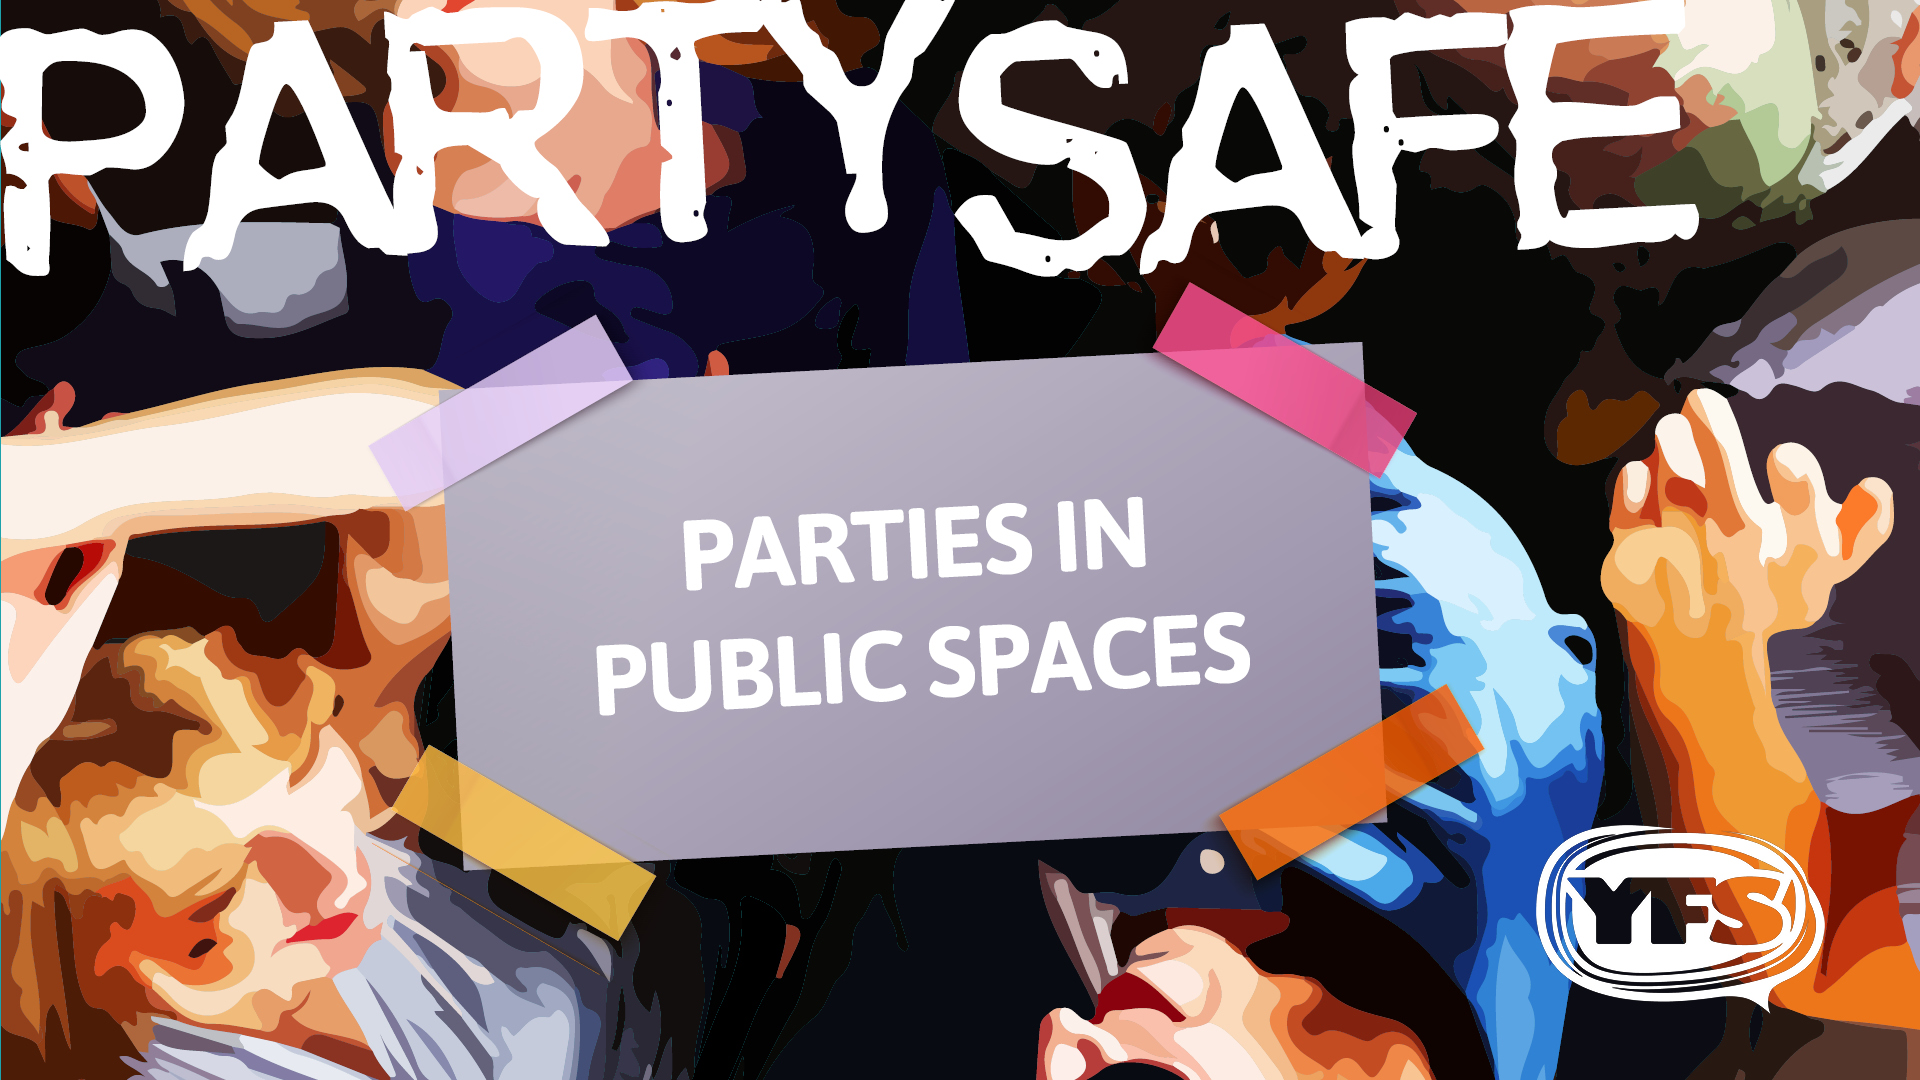 You are currently viewing Party safely: Partying in public spaces